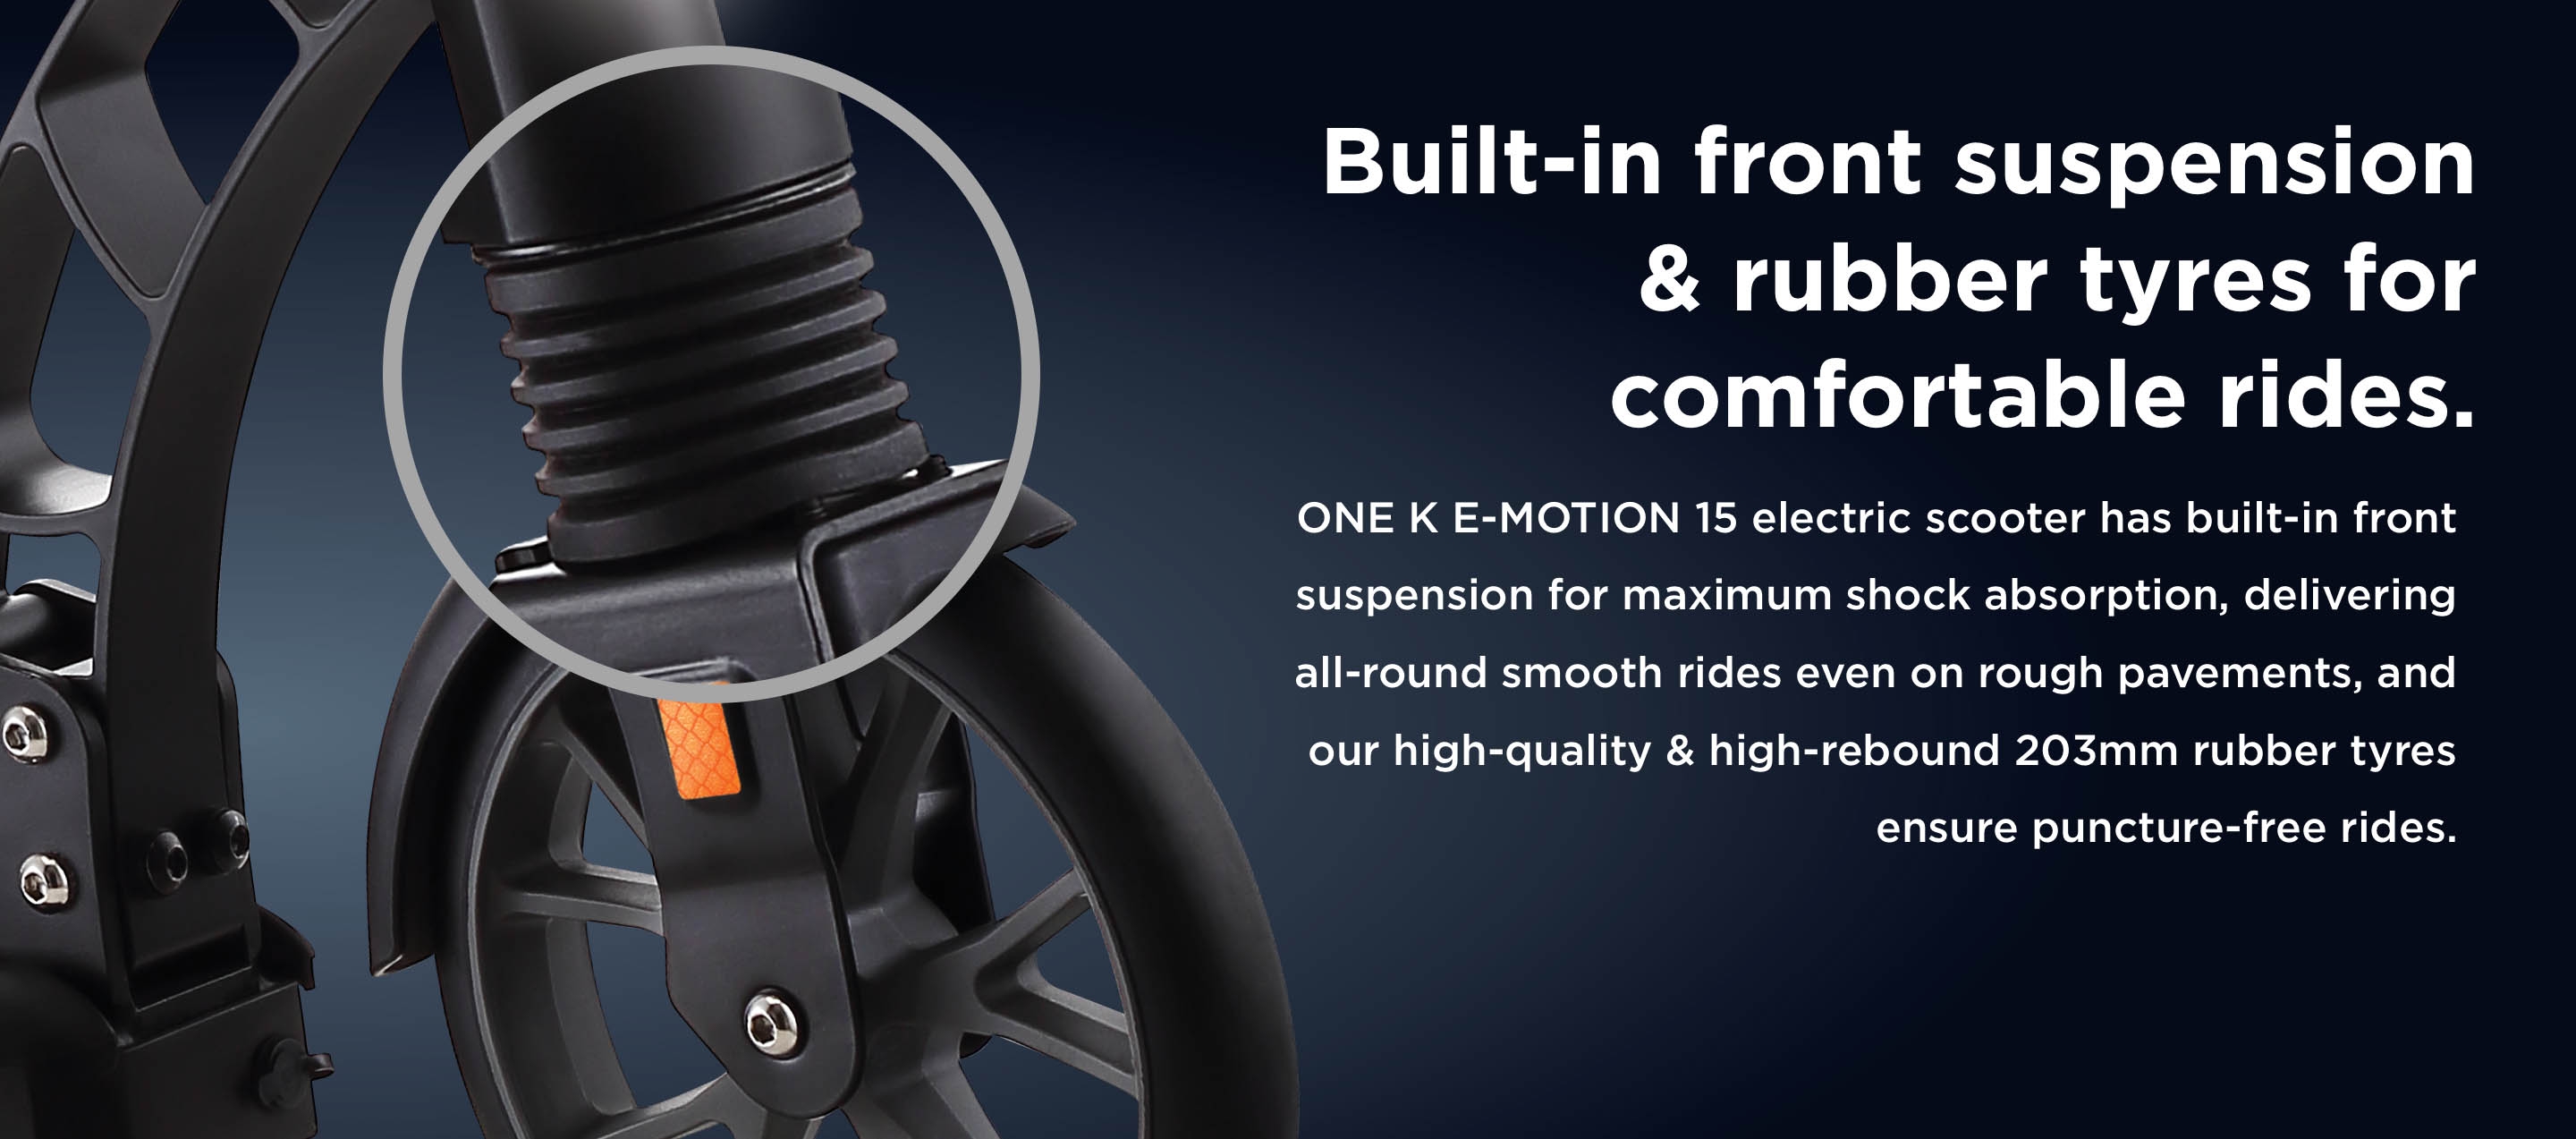 Built-in front suspension & rubber tyres for comfortable rides. ONE K E-MOTION 15 electric scooter has built-in front suspension for maximum shock absorption, delivering all-round smooth rides even on rough pavements, and our high-quality & high-rebound 203mm rubber tyres ensure puncture-free rides.